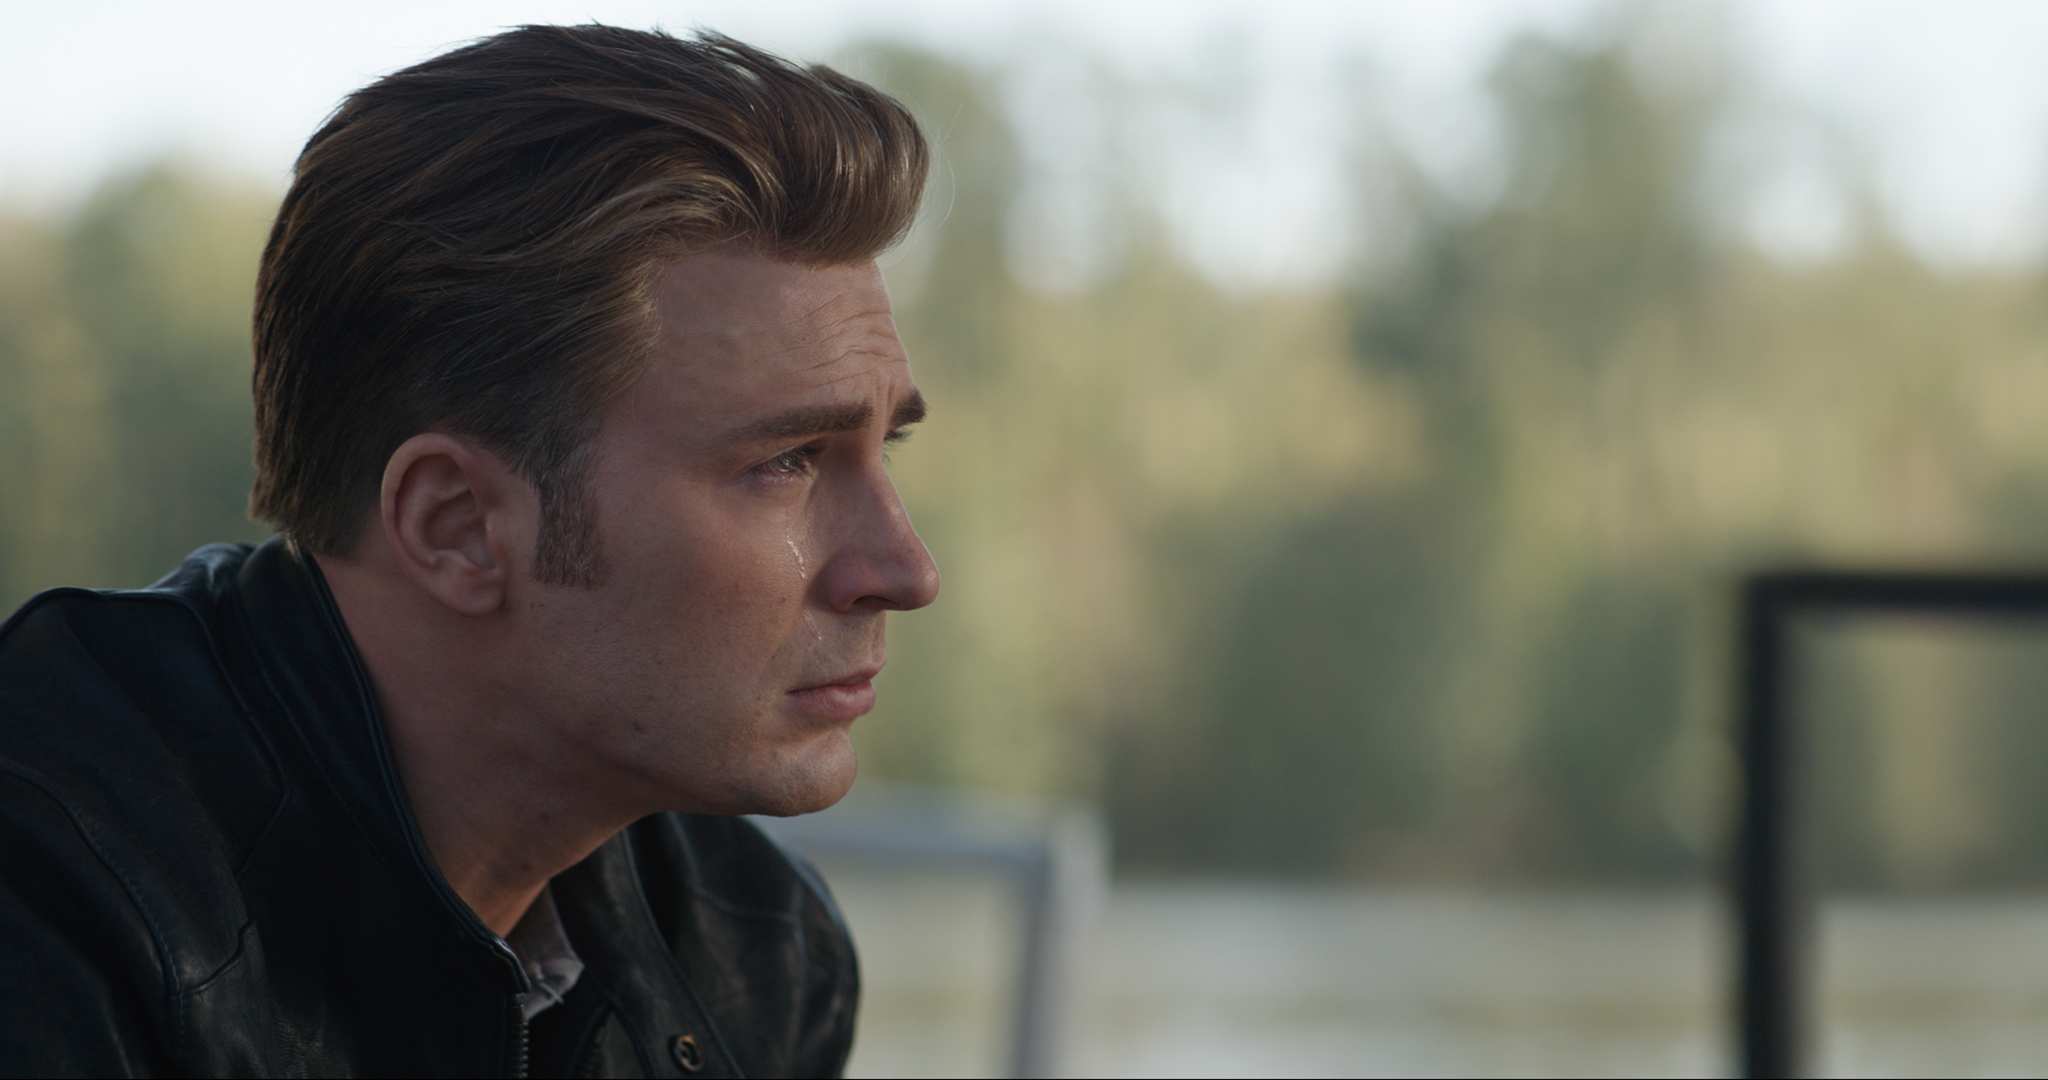 Avengers Endgame Image Tease Emotional Reunions And Team Ups